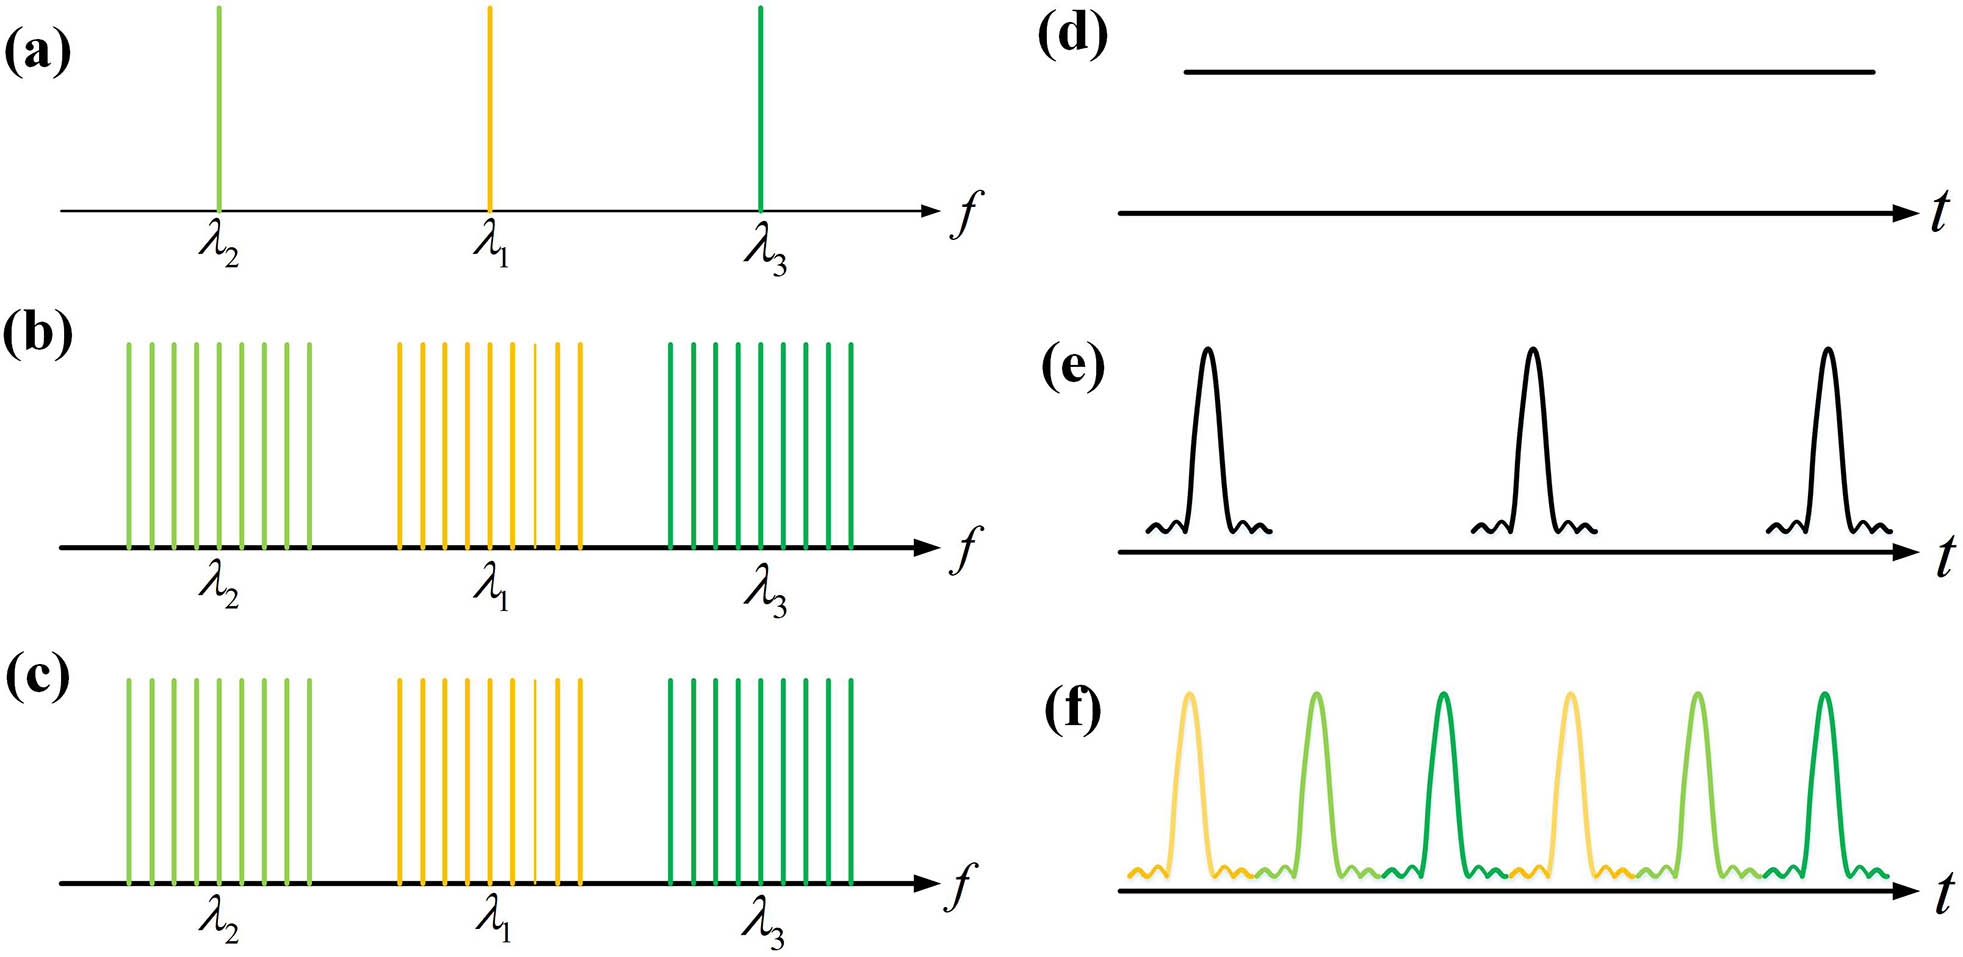 The process of spectrum and pulse evolution of each point. (a) and (d), respectively, correspond to the spectrum and pulse of point a in Fig. 1; (b) and (e), respectively, correspond to the spectrum and pulse of point b in Fig. 1; (c) and (f), respectively, correspond to the spectrum and pulse of point c in Fig. 1.